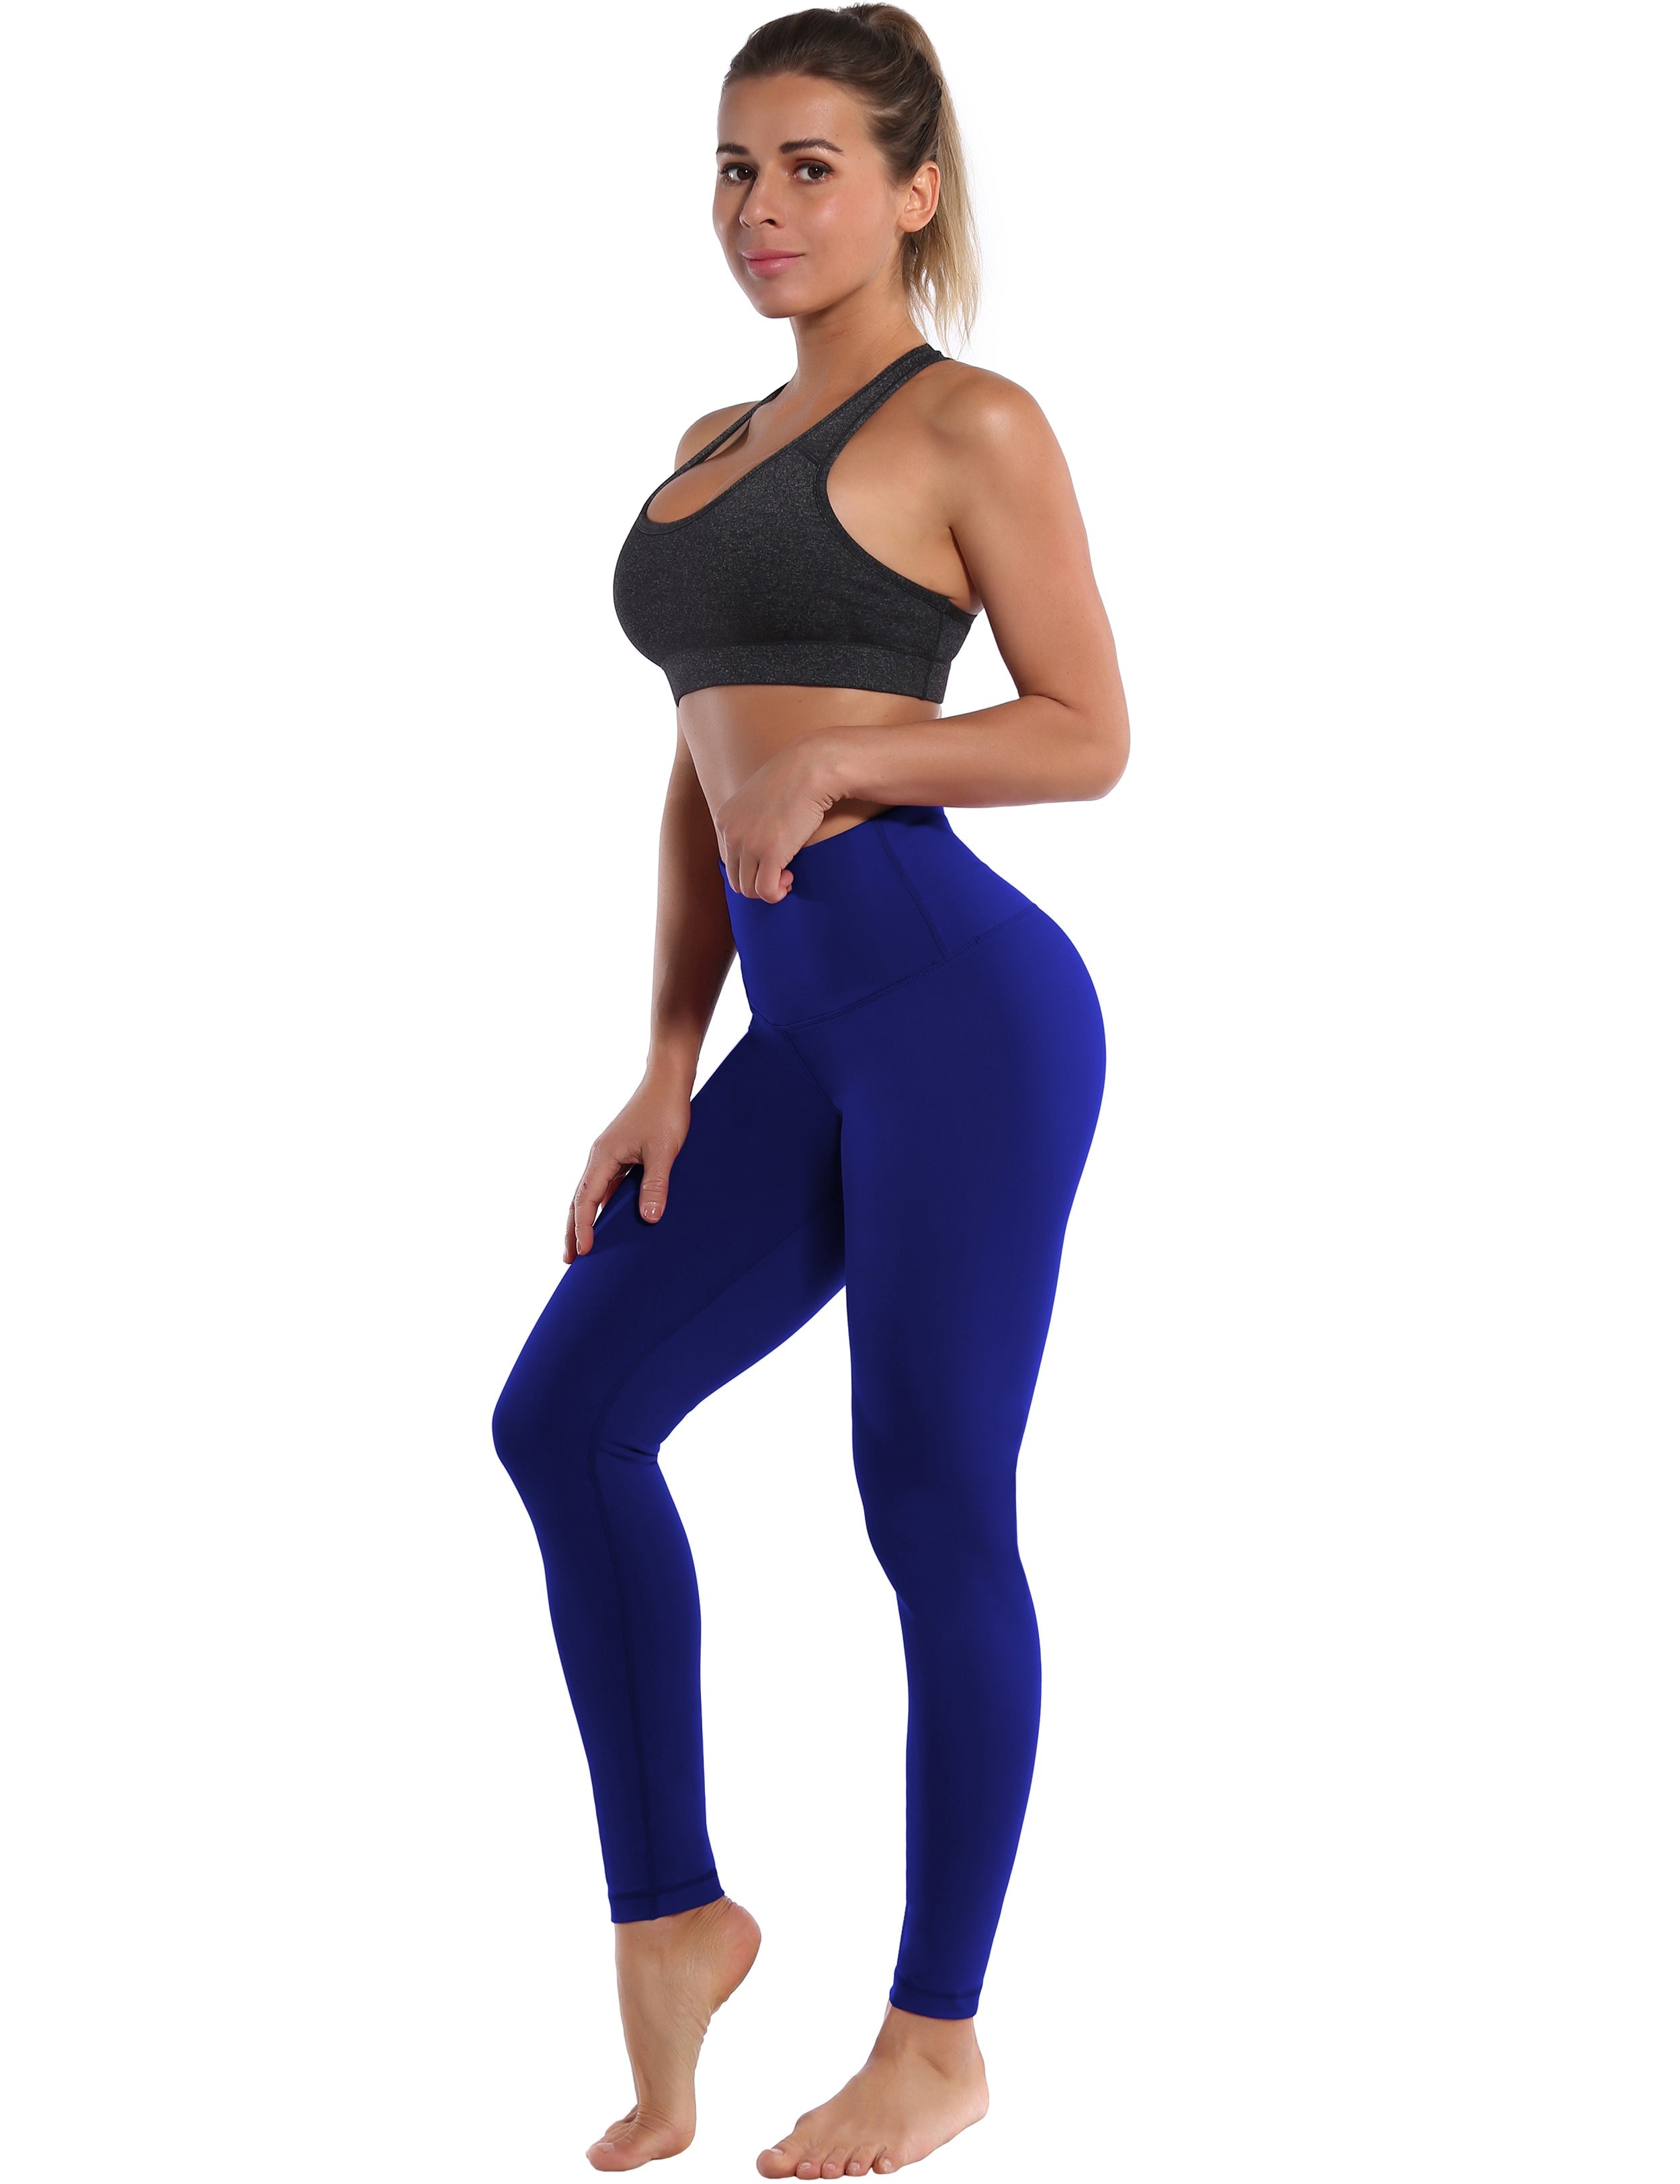 High Waist Golf Pants navy 75%Nylon/25%Spandex Fabric doesn't attract lint easily 4-way stretch No see-through Moisture-wicking Tummy control Inner pocket Four lengths